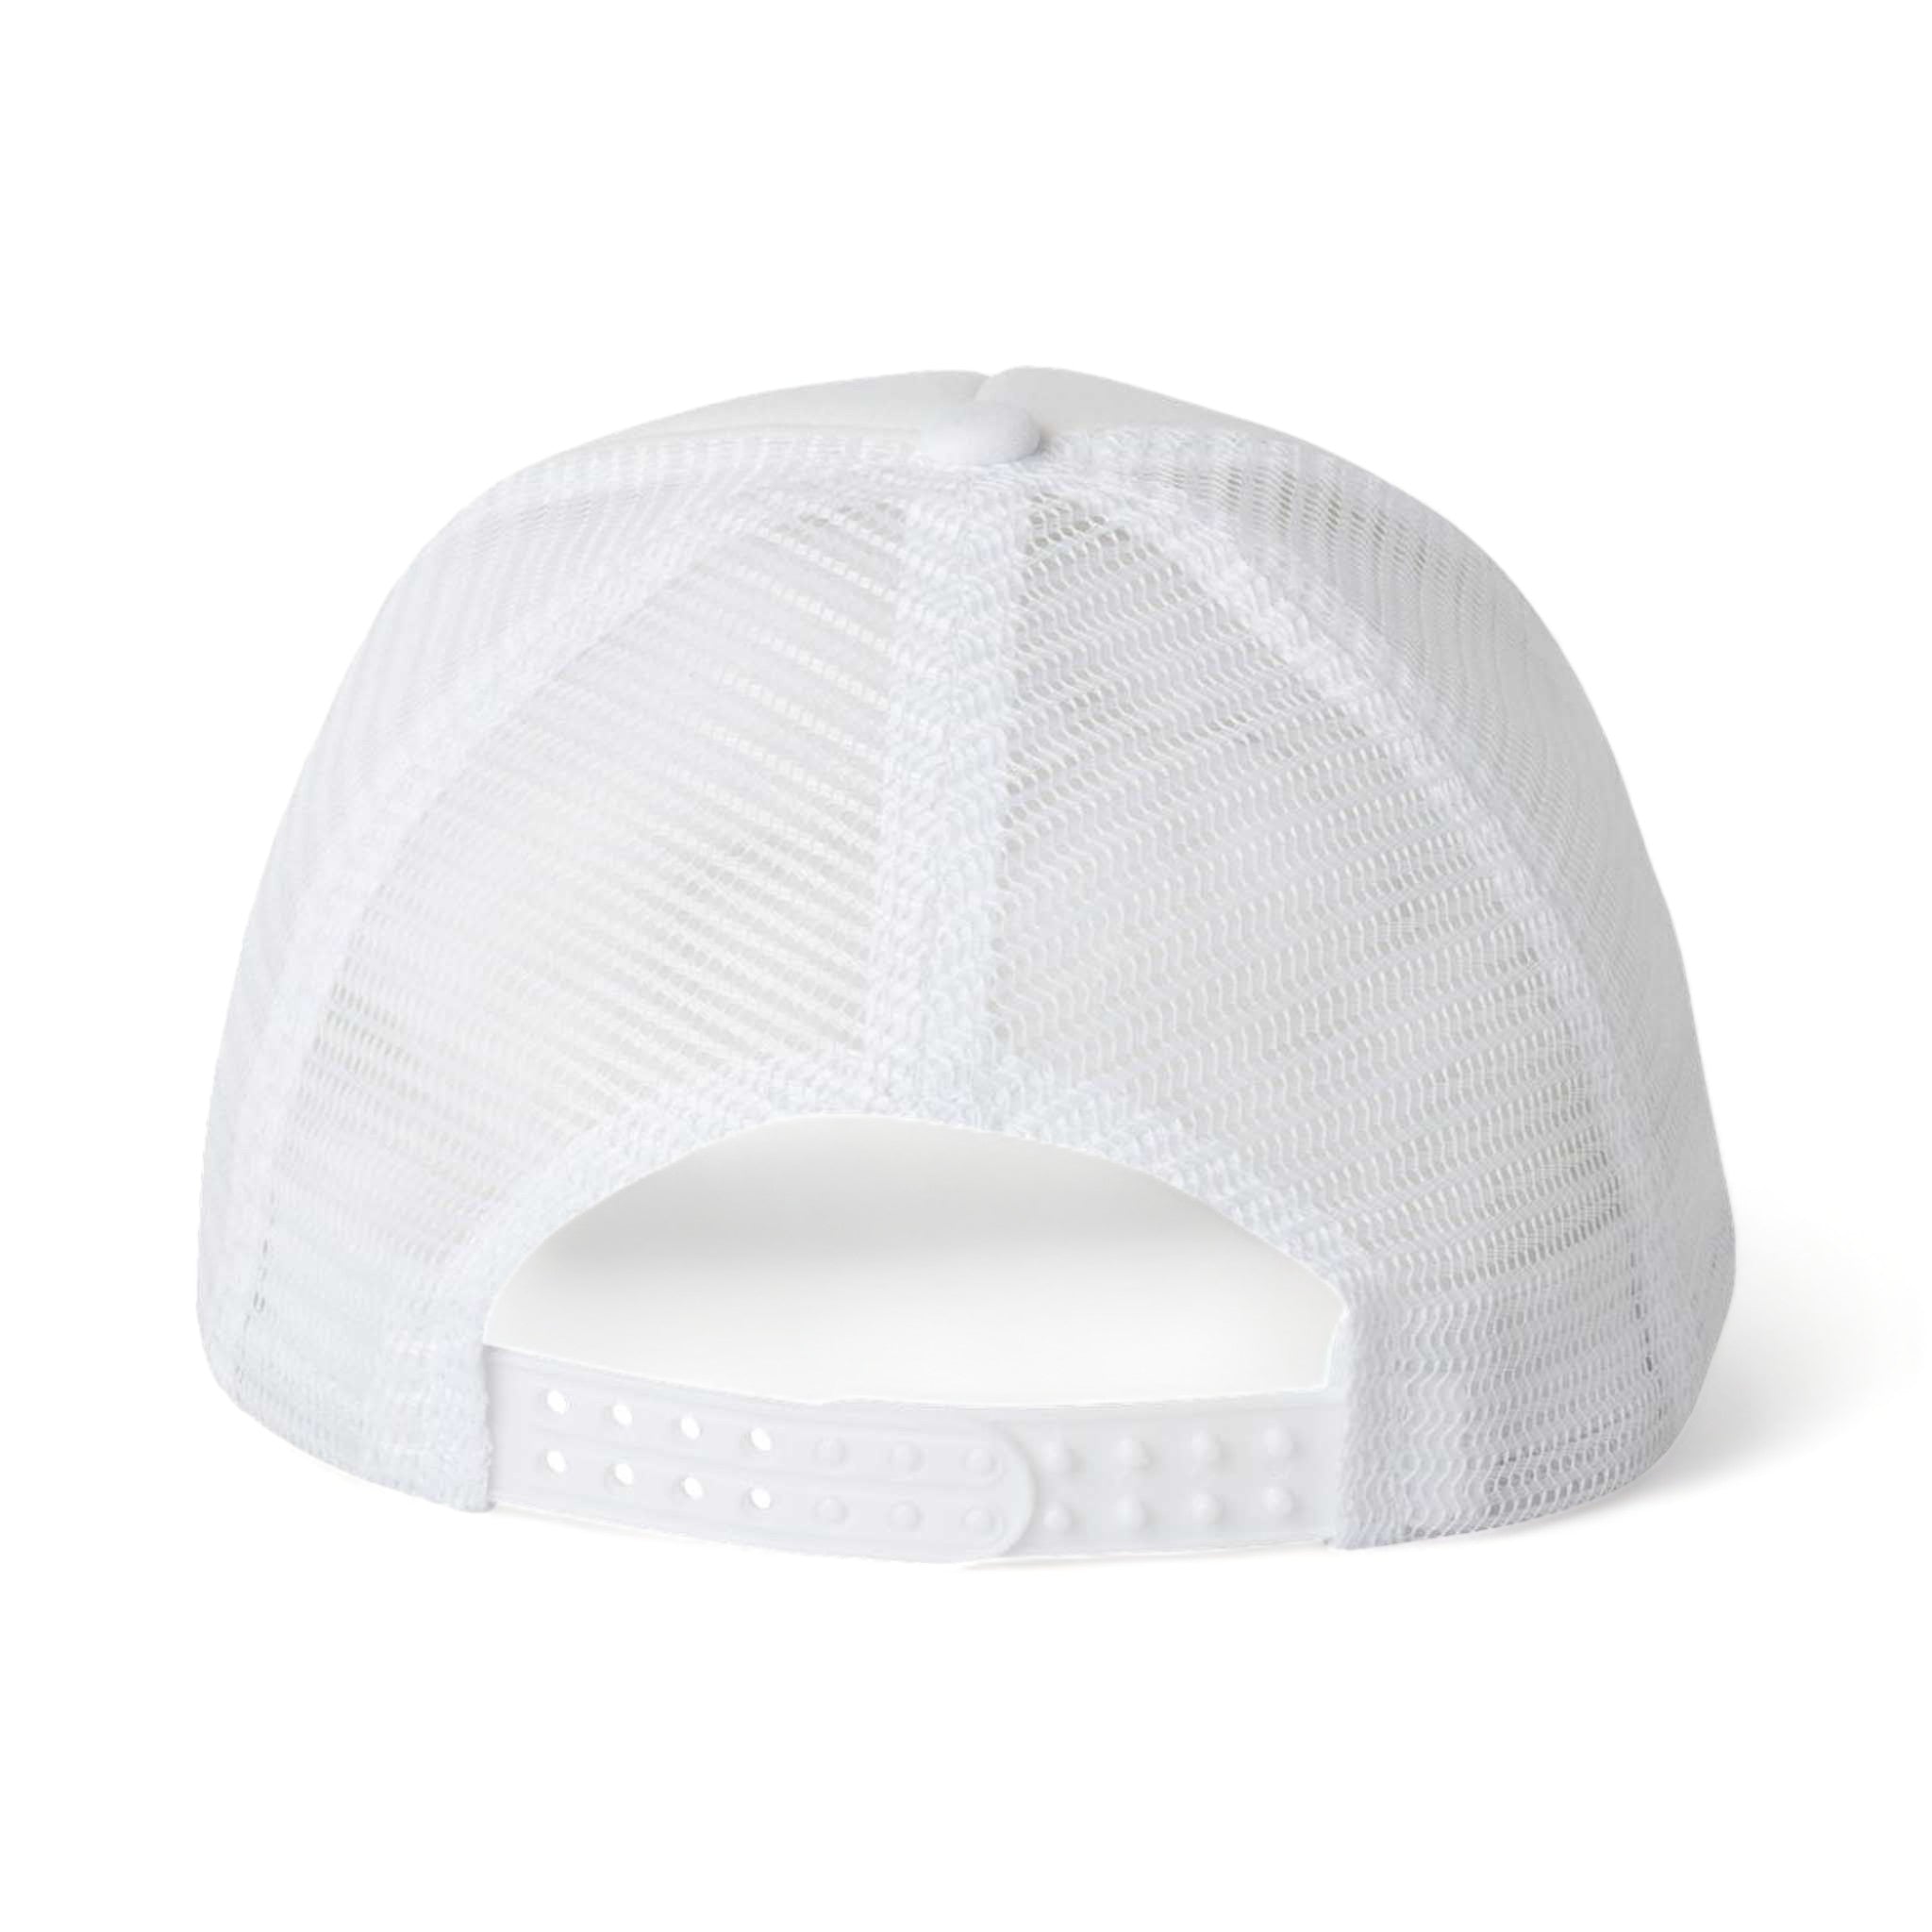 Back view of Valucap VC700 custom hat in white and white